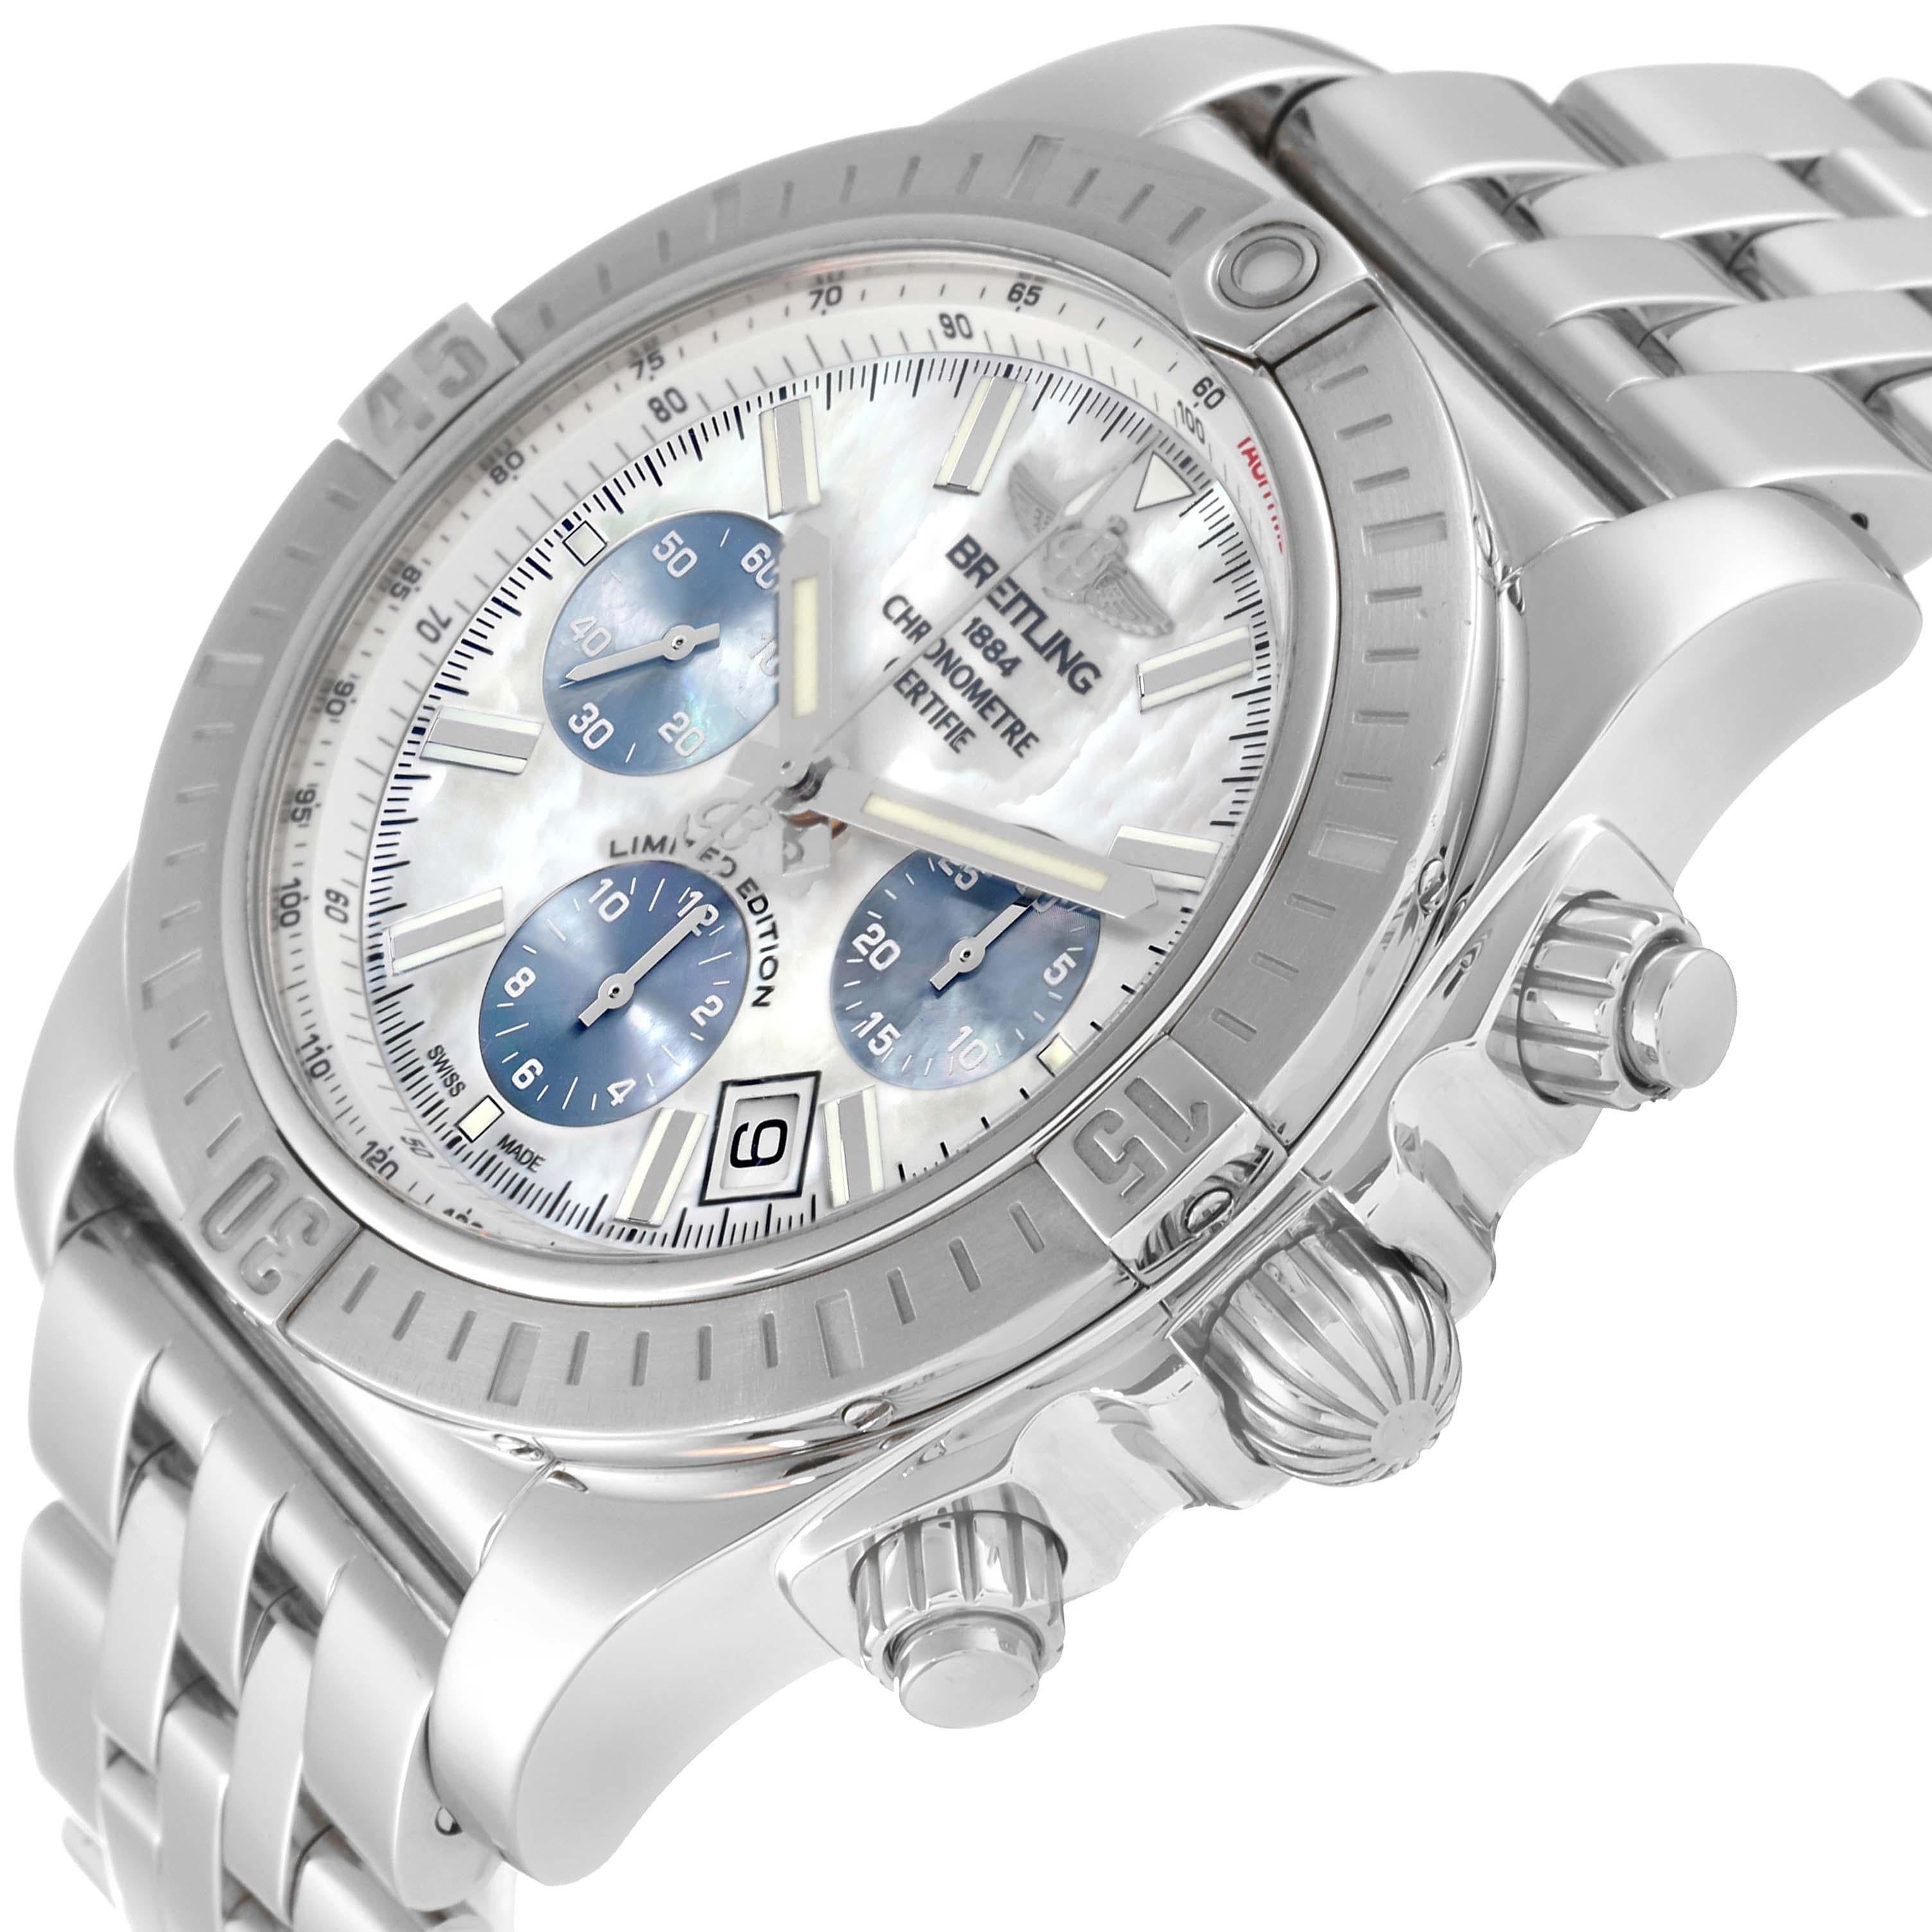 Breitling Chronomat 44 Airbourne Mother of Pearl Dial Steel Mens Watch AB0115. Self-winding automatic officially certified chronometer movement. Chronograph function. Stainless steel case 44.0 mm in diameter. Stainless steel unidirectional rotating